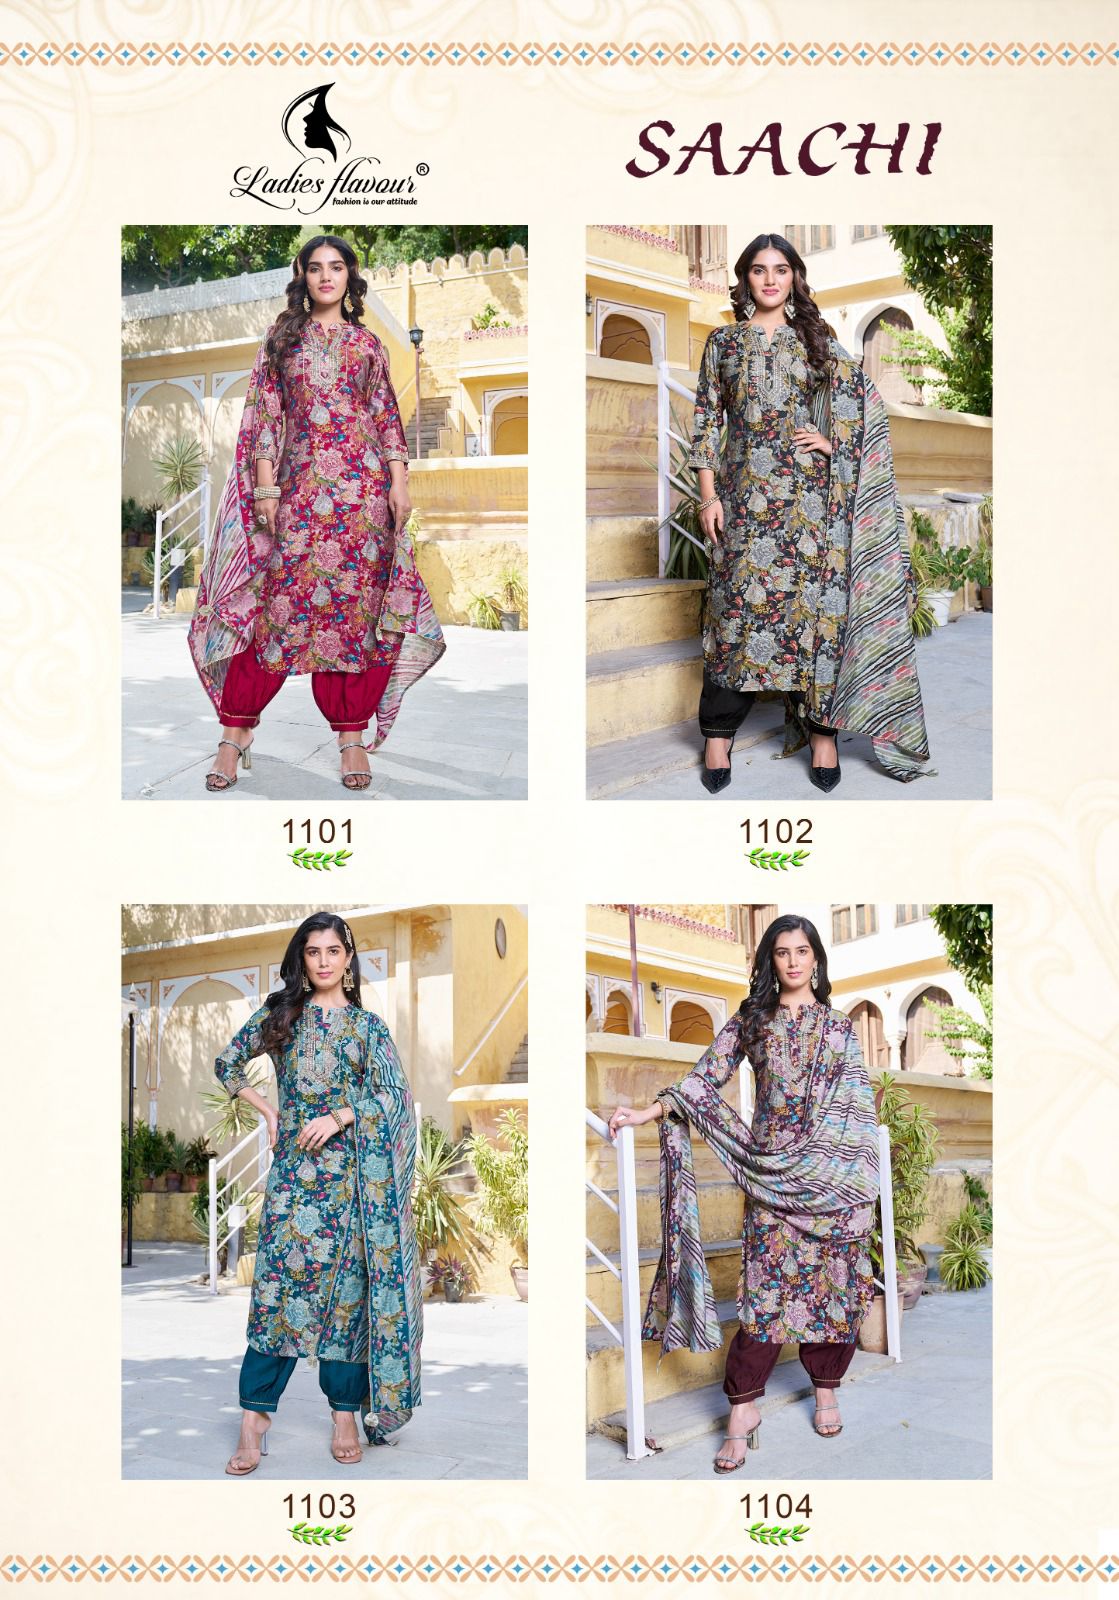 Saachi - A woman's wardrobe is her opportunity to stand out and make a  lasting first impression.